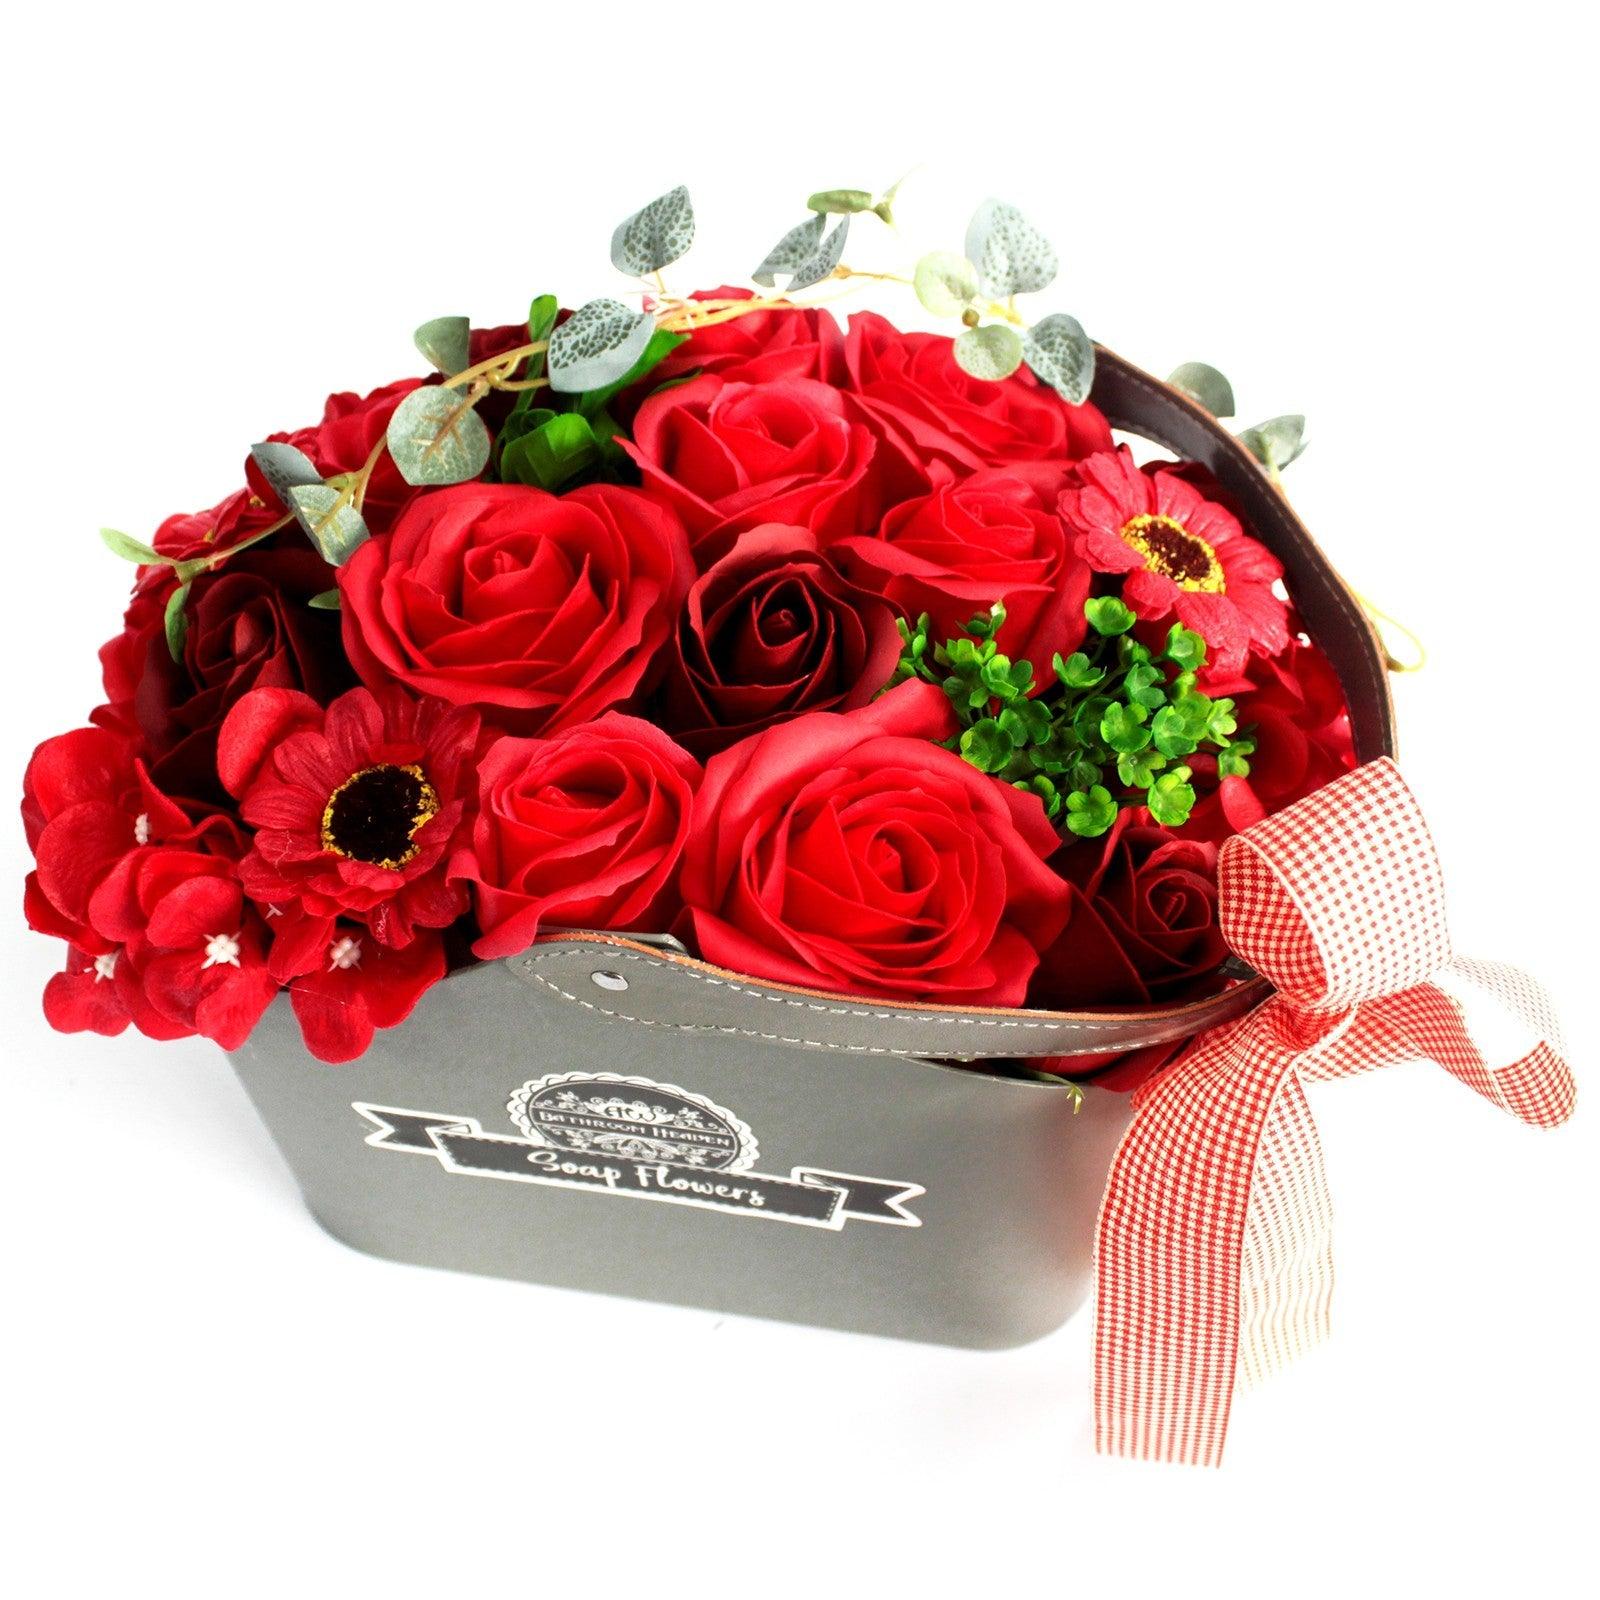 Soap Flower Red Bouquet In Grey Basket - Charming Spaces